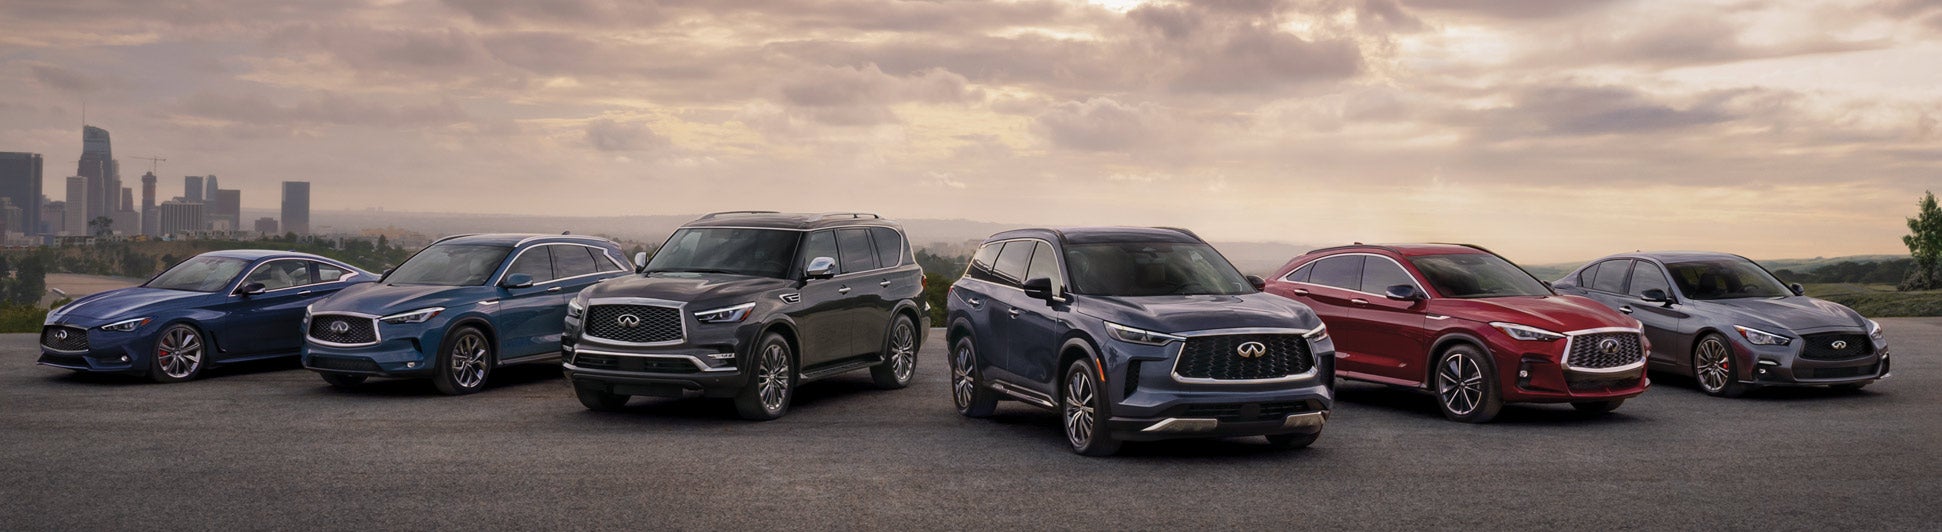 INFINITI of Cool Springs is a premier destination for all your INFINITI needs. We stock one of the largest inventories in the area and provide exceptional customer service!